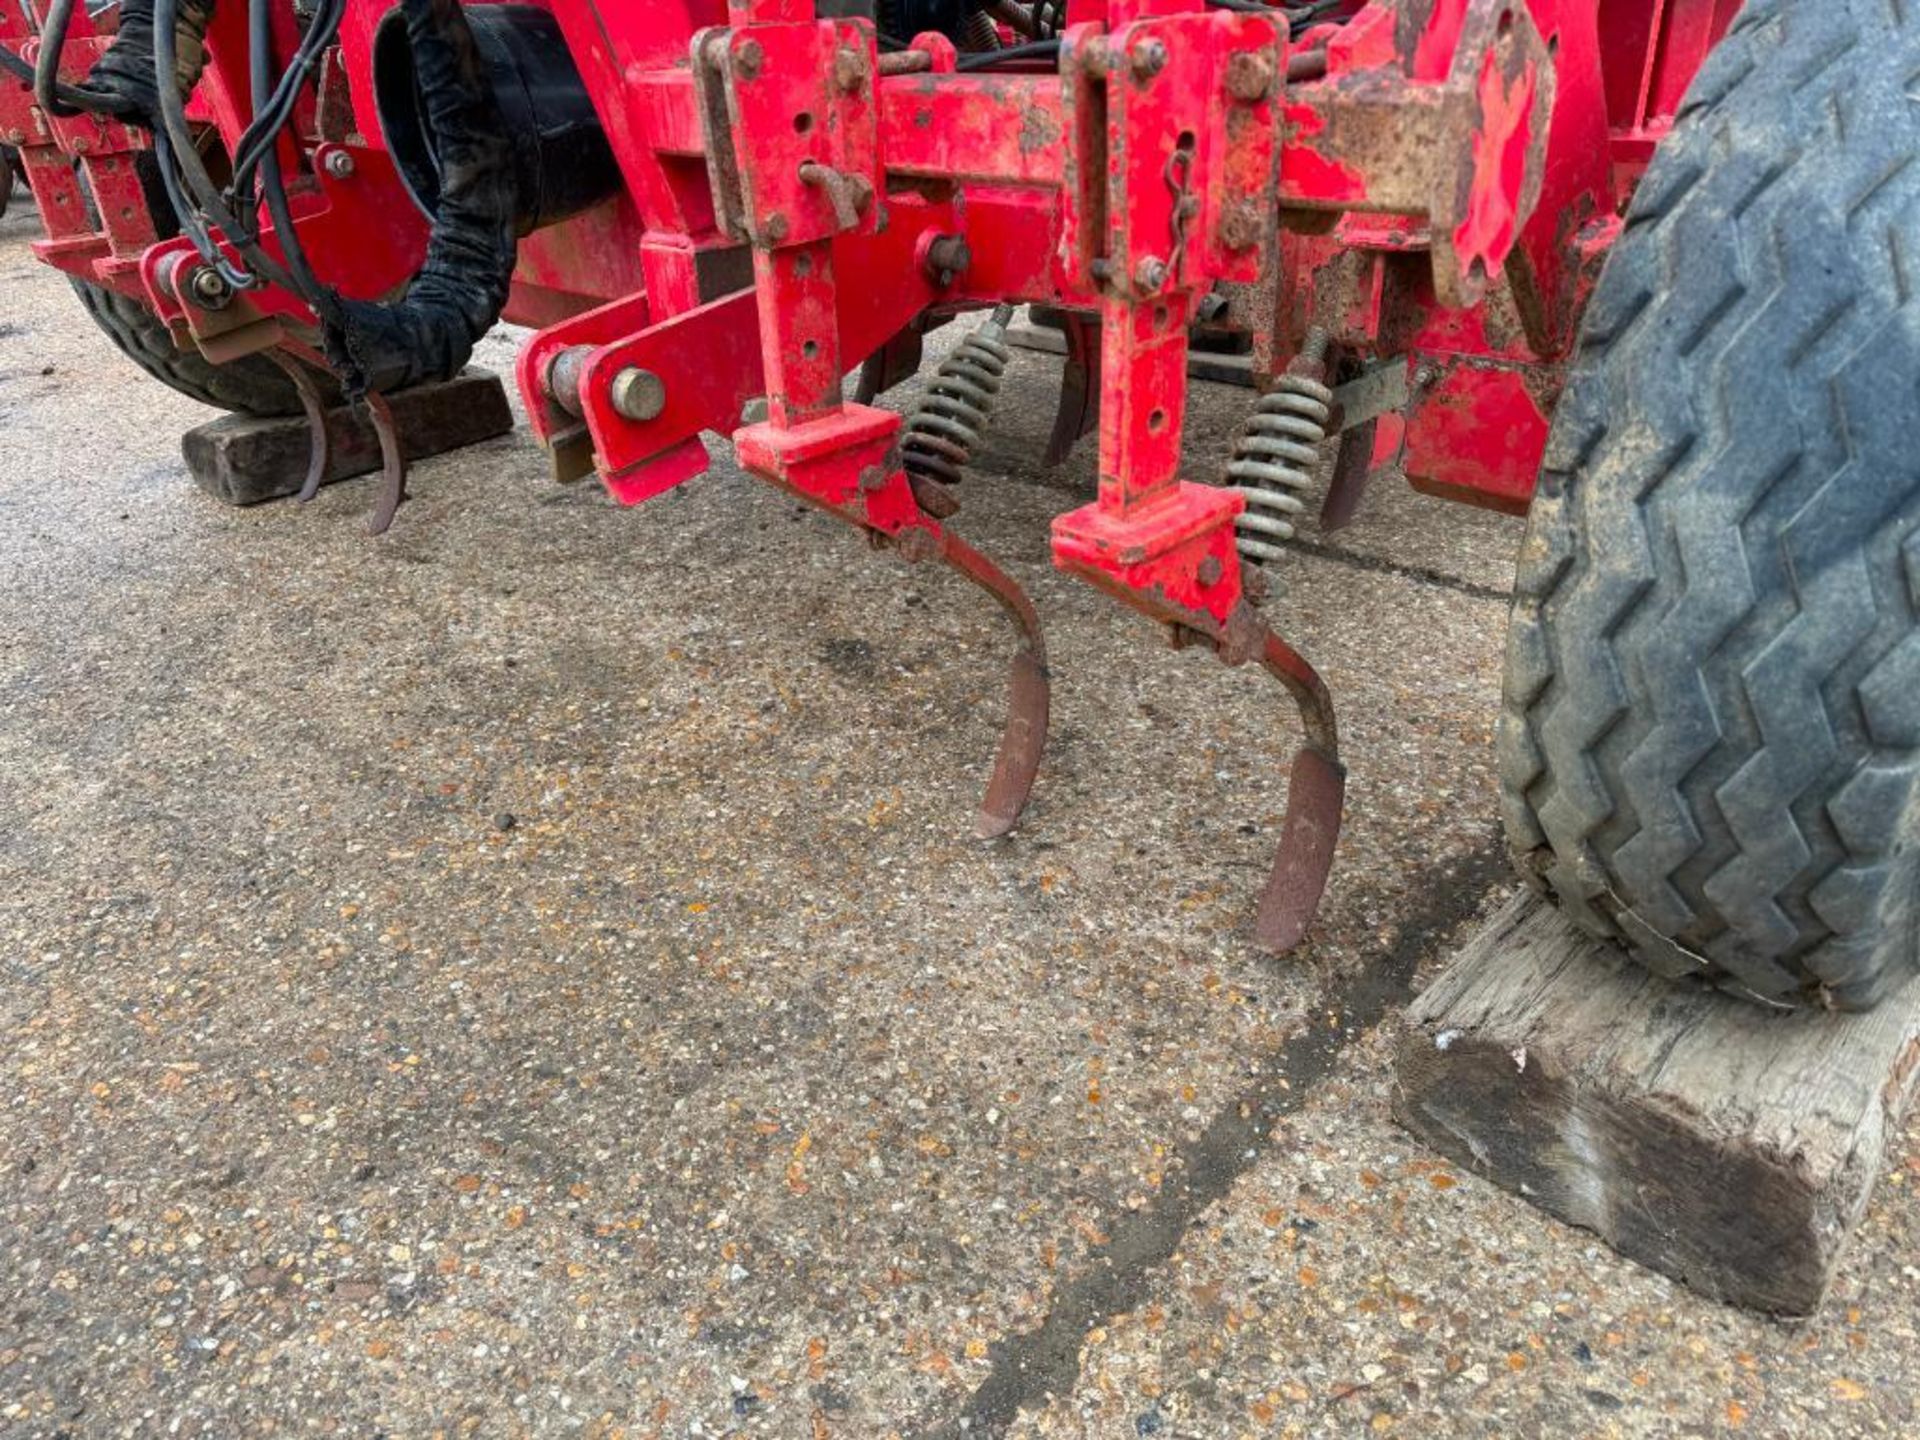 Weaving 6m tine drill hydraulic folding with bout markers and wheel track eradicators - Image 2 of 11